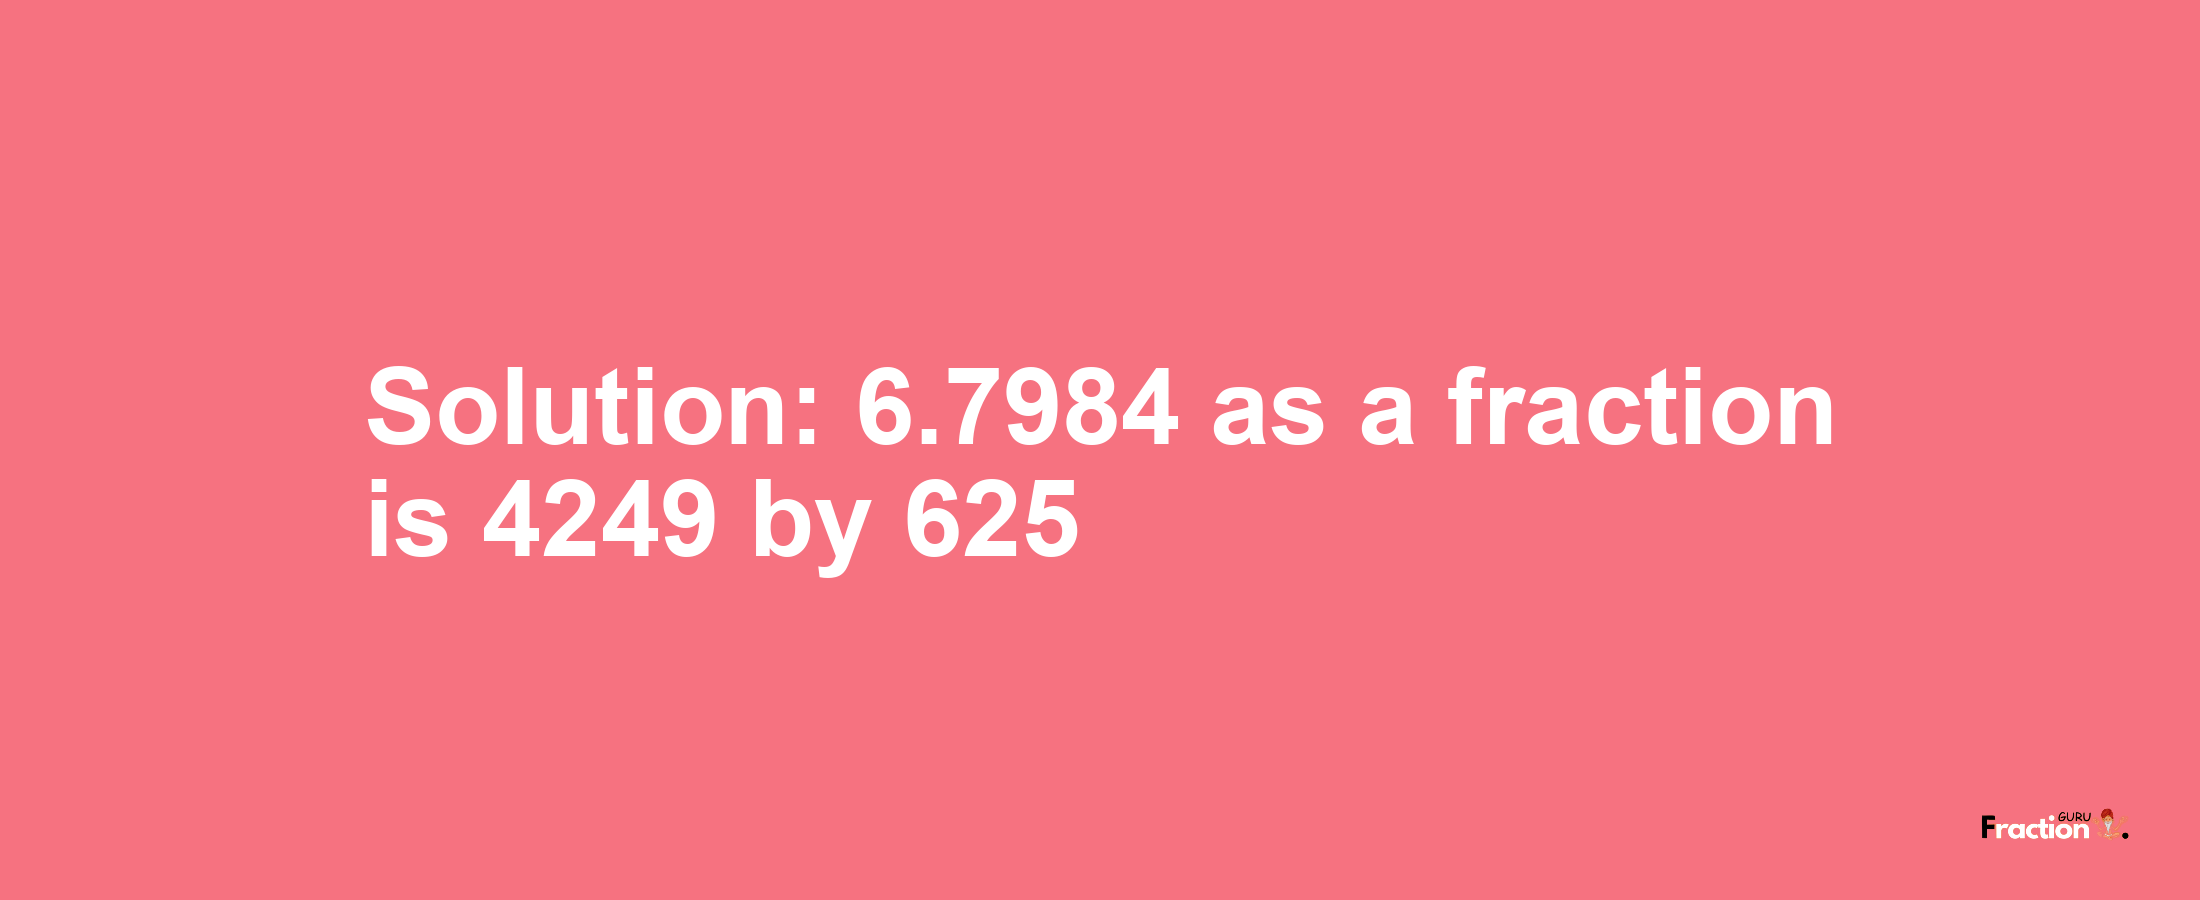 Solution:6.7984 as a fraction is 4249/625